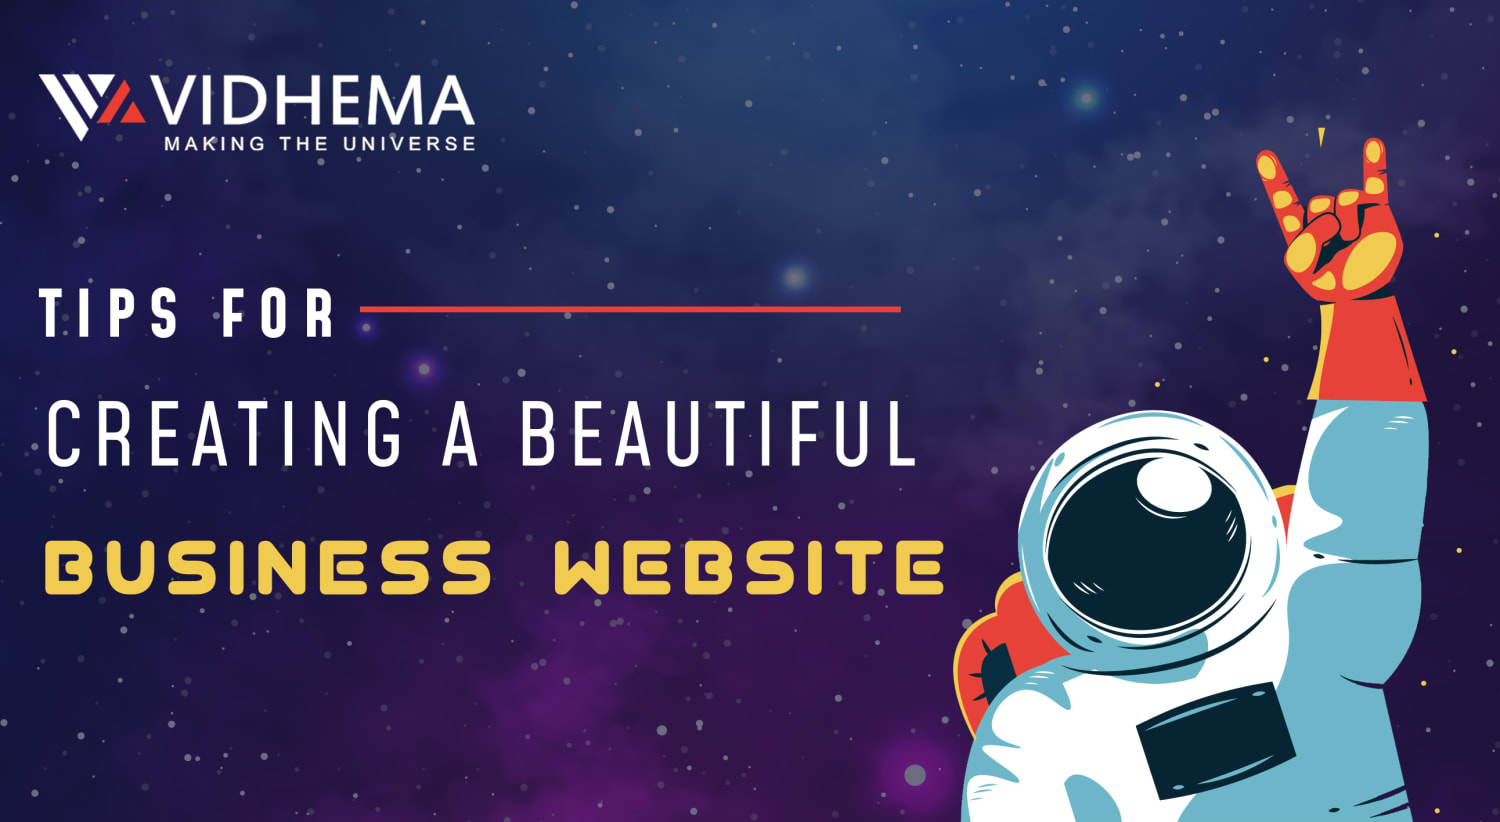 Tips for Creating a Beautiful Business Website